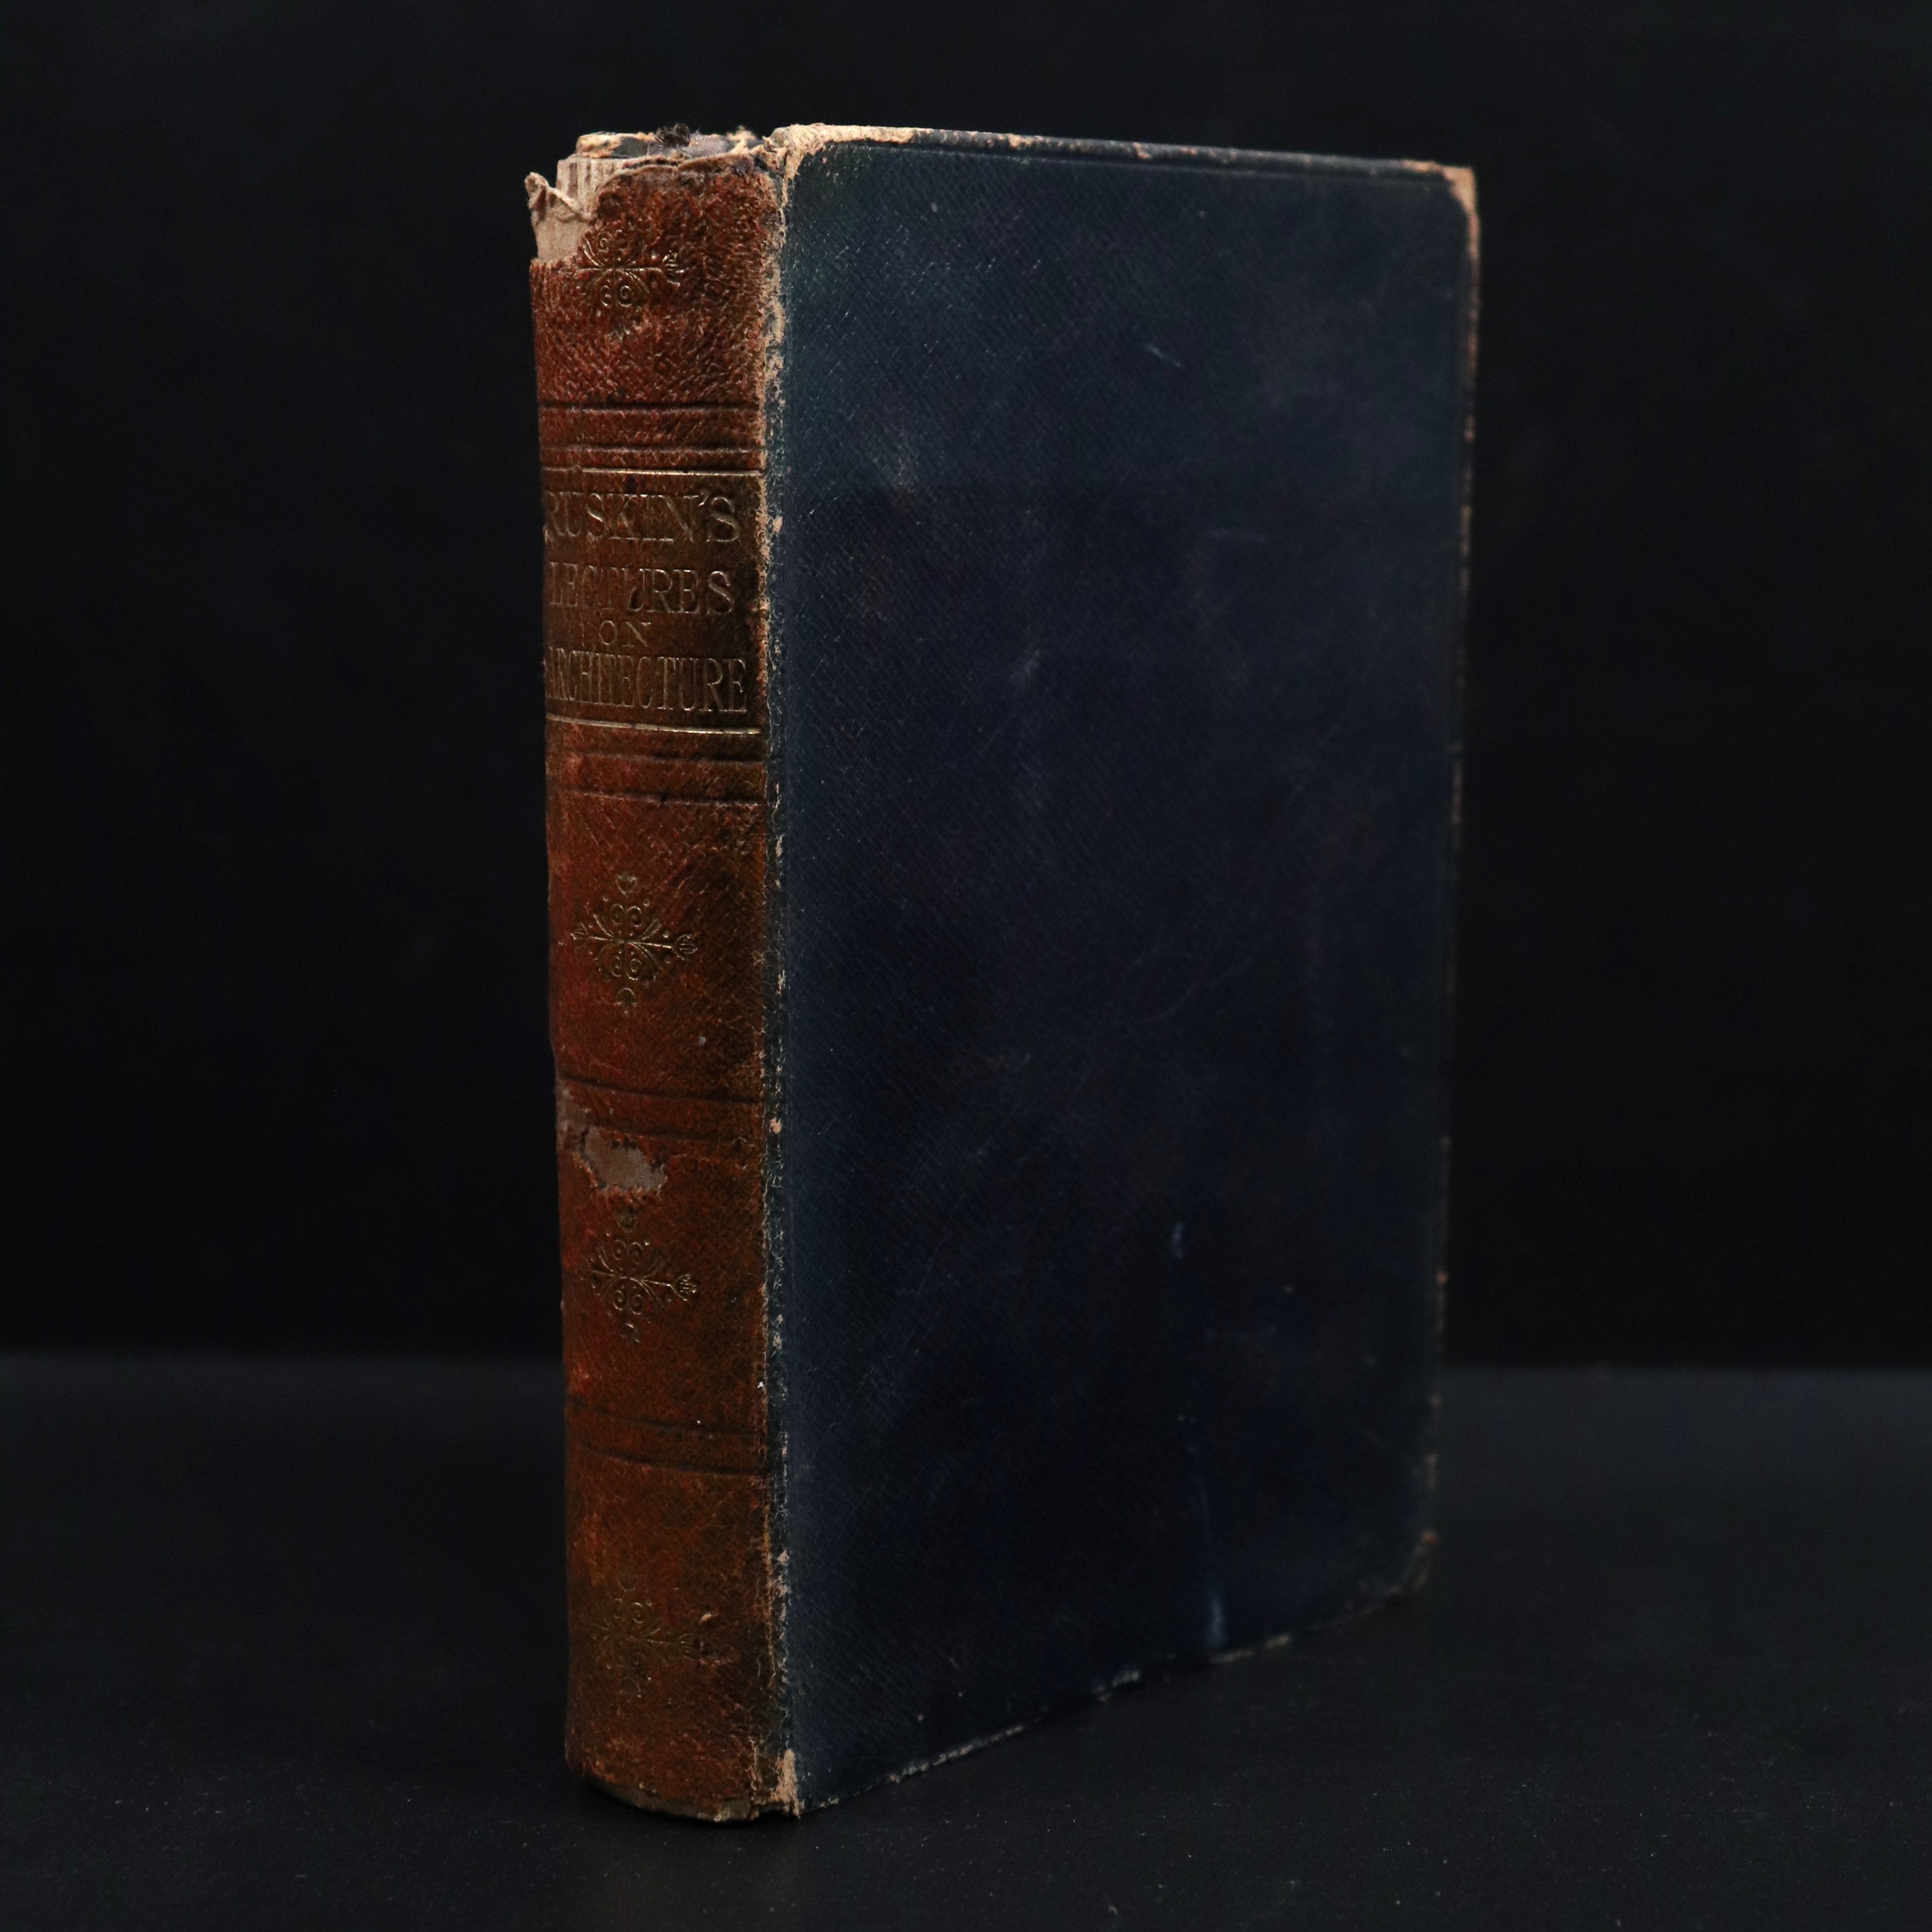 1907 Lectures On Architecture & Painting by John Ruskin Antique Book